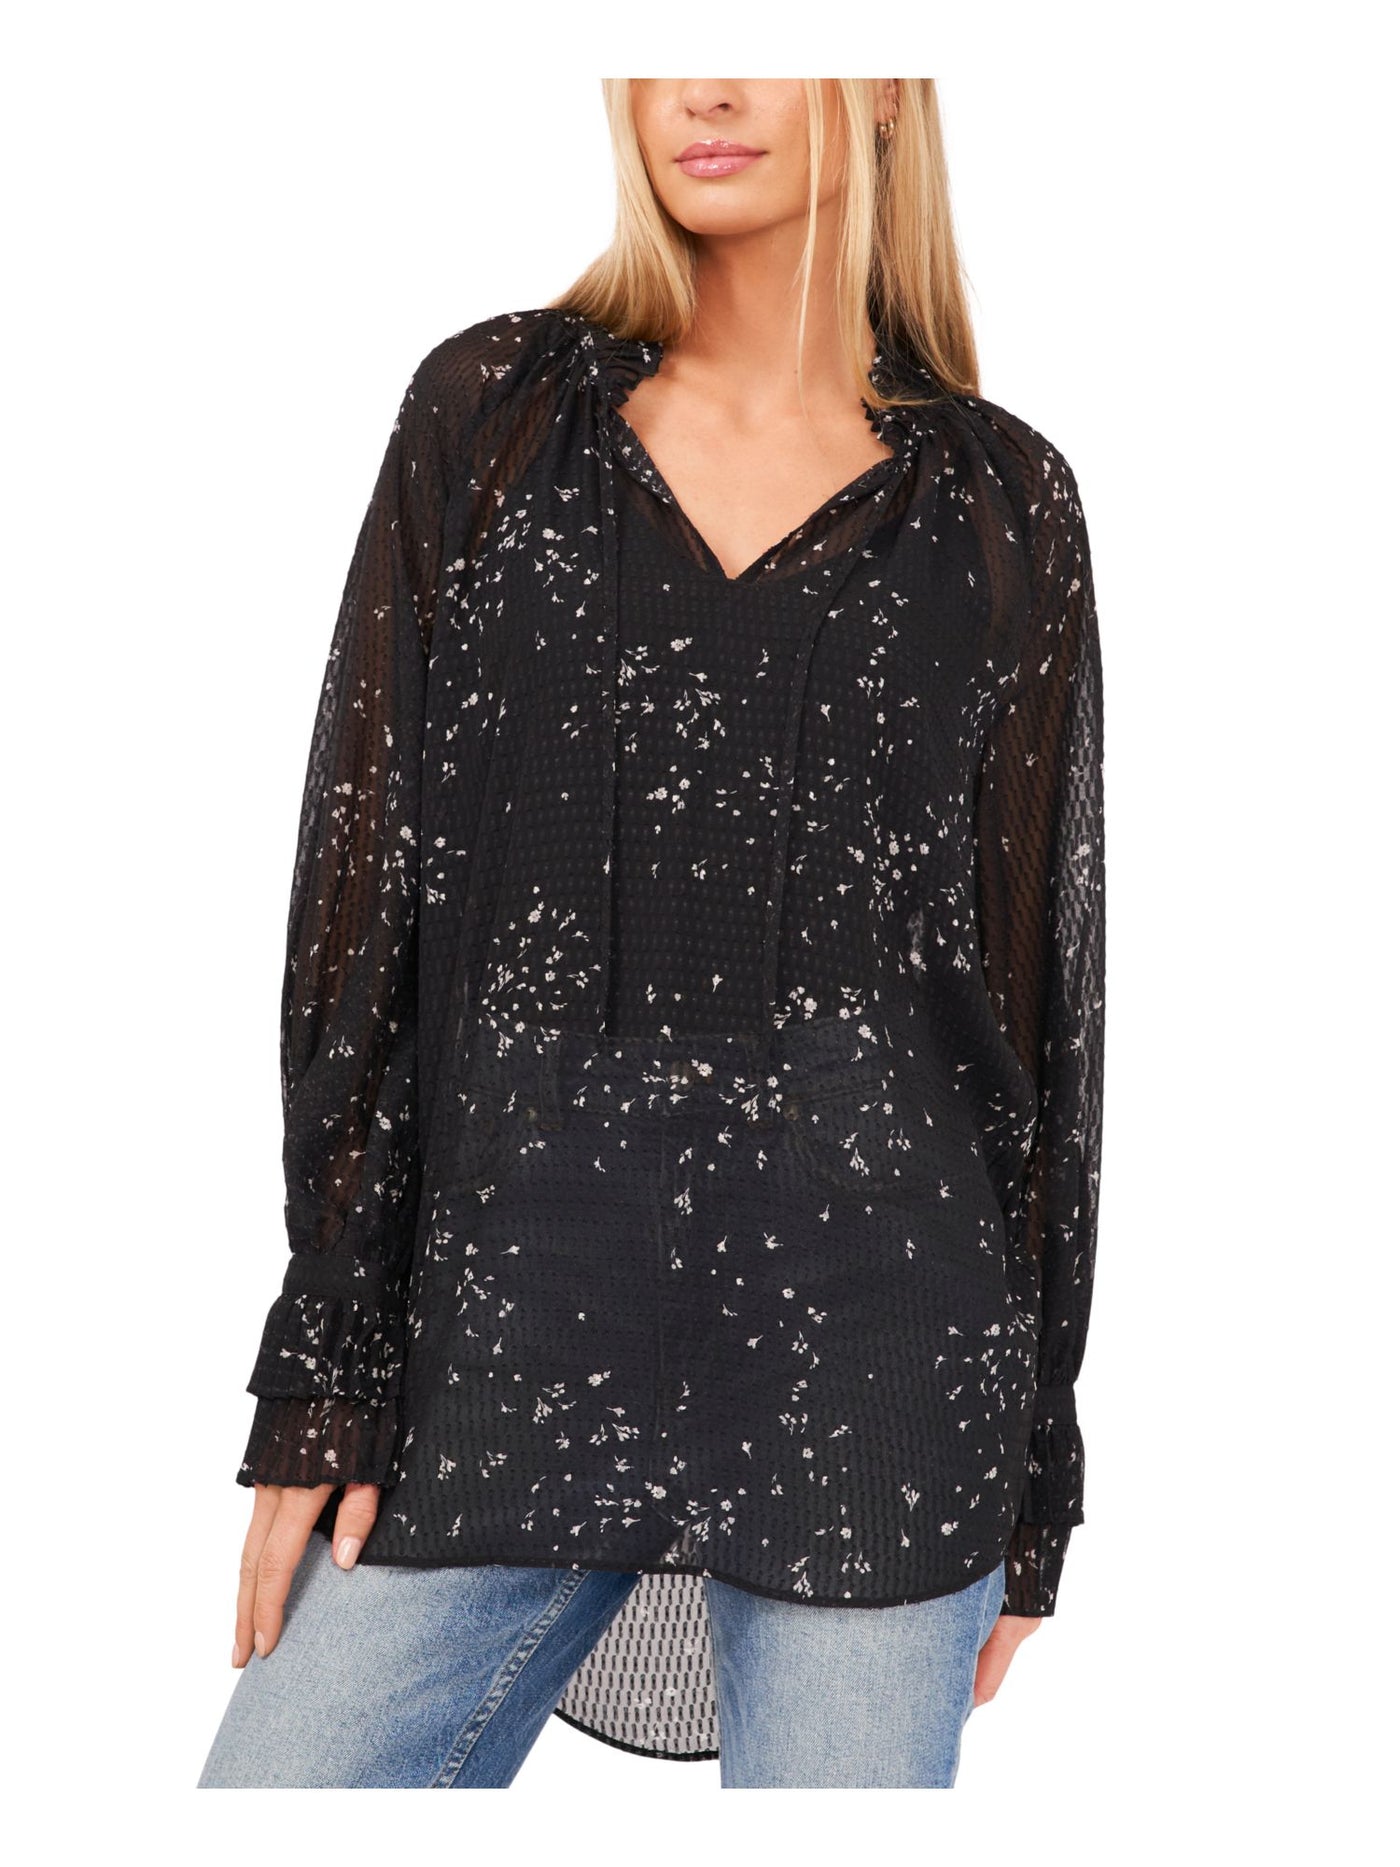 VINCE CAMUTO Womens Black Sheer Floral Long Sleeve V Neck Tunic Top XS